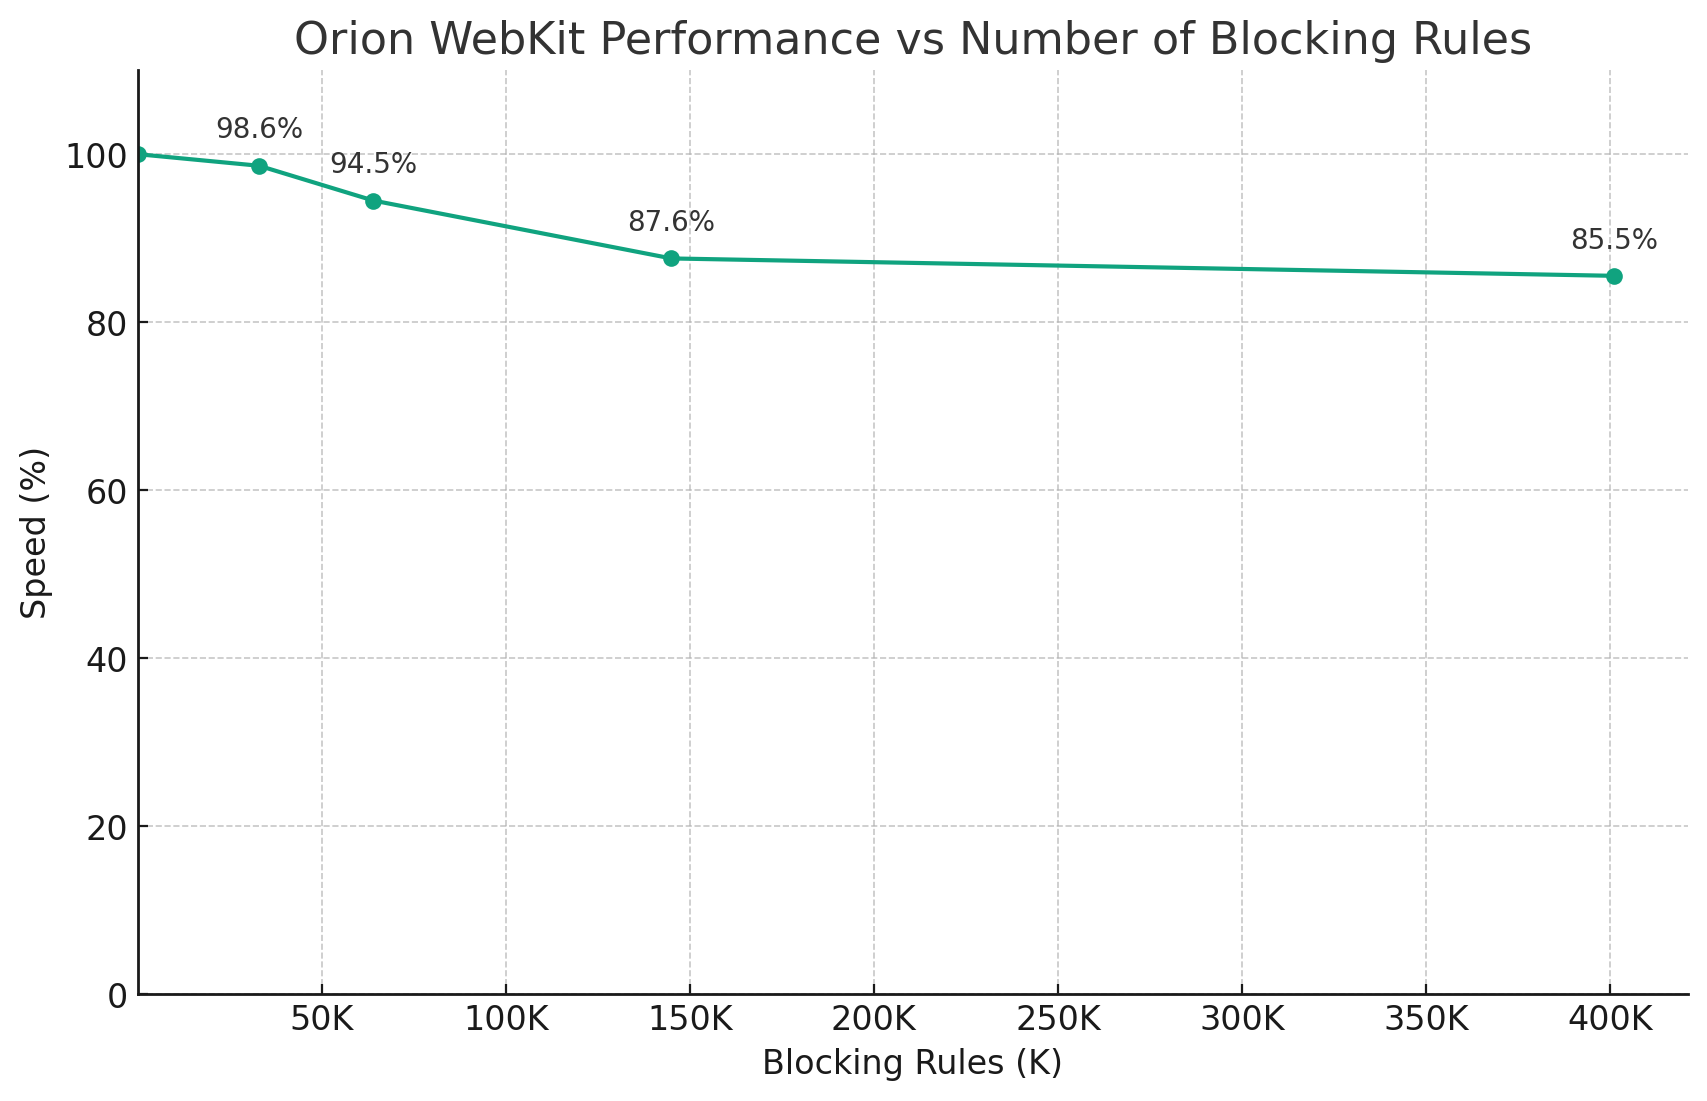 Blocklists - Impact of Number of Blocking Rules on Performance